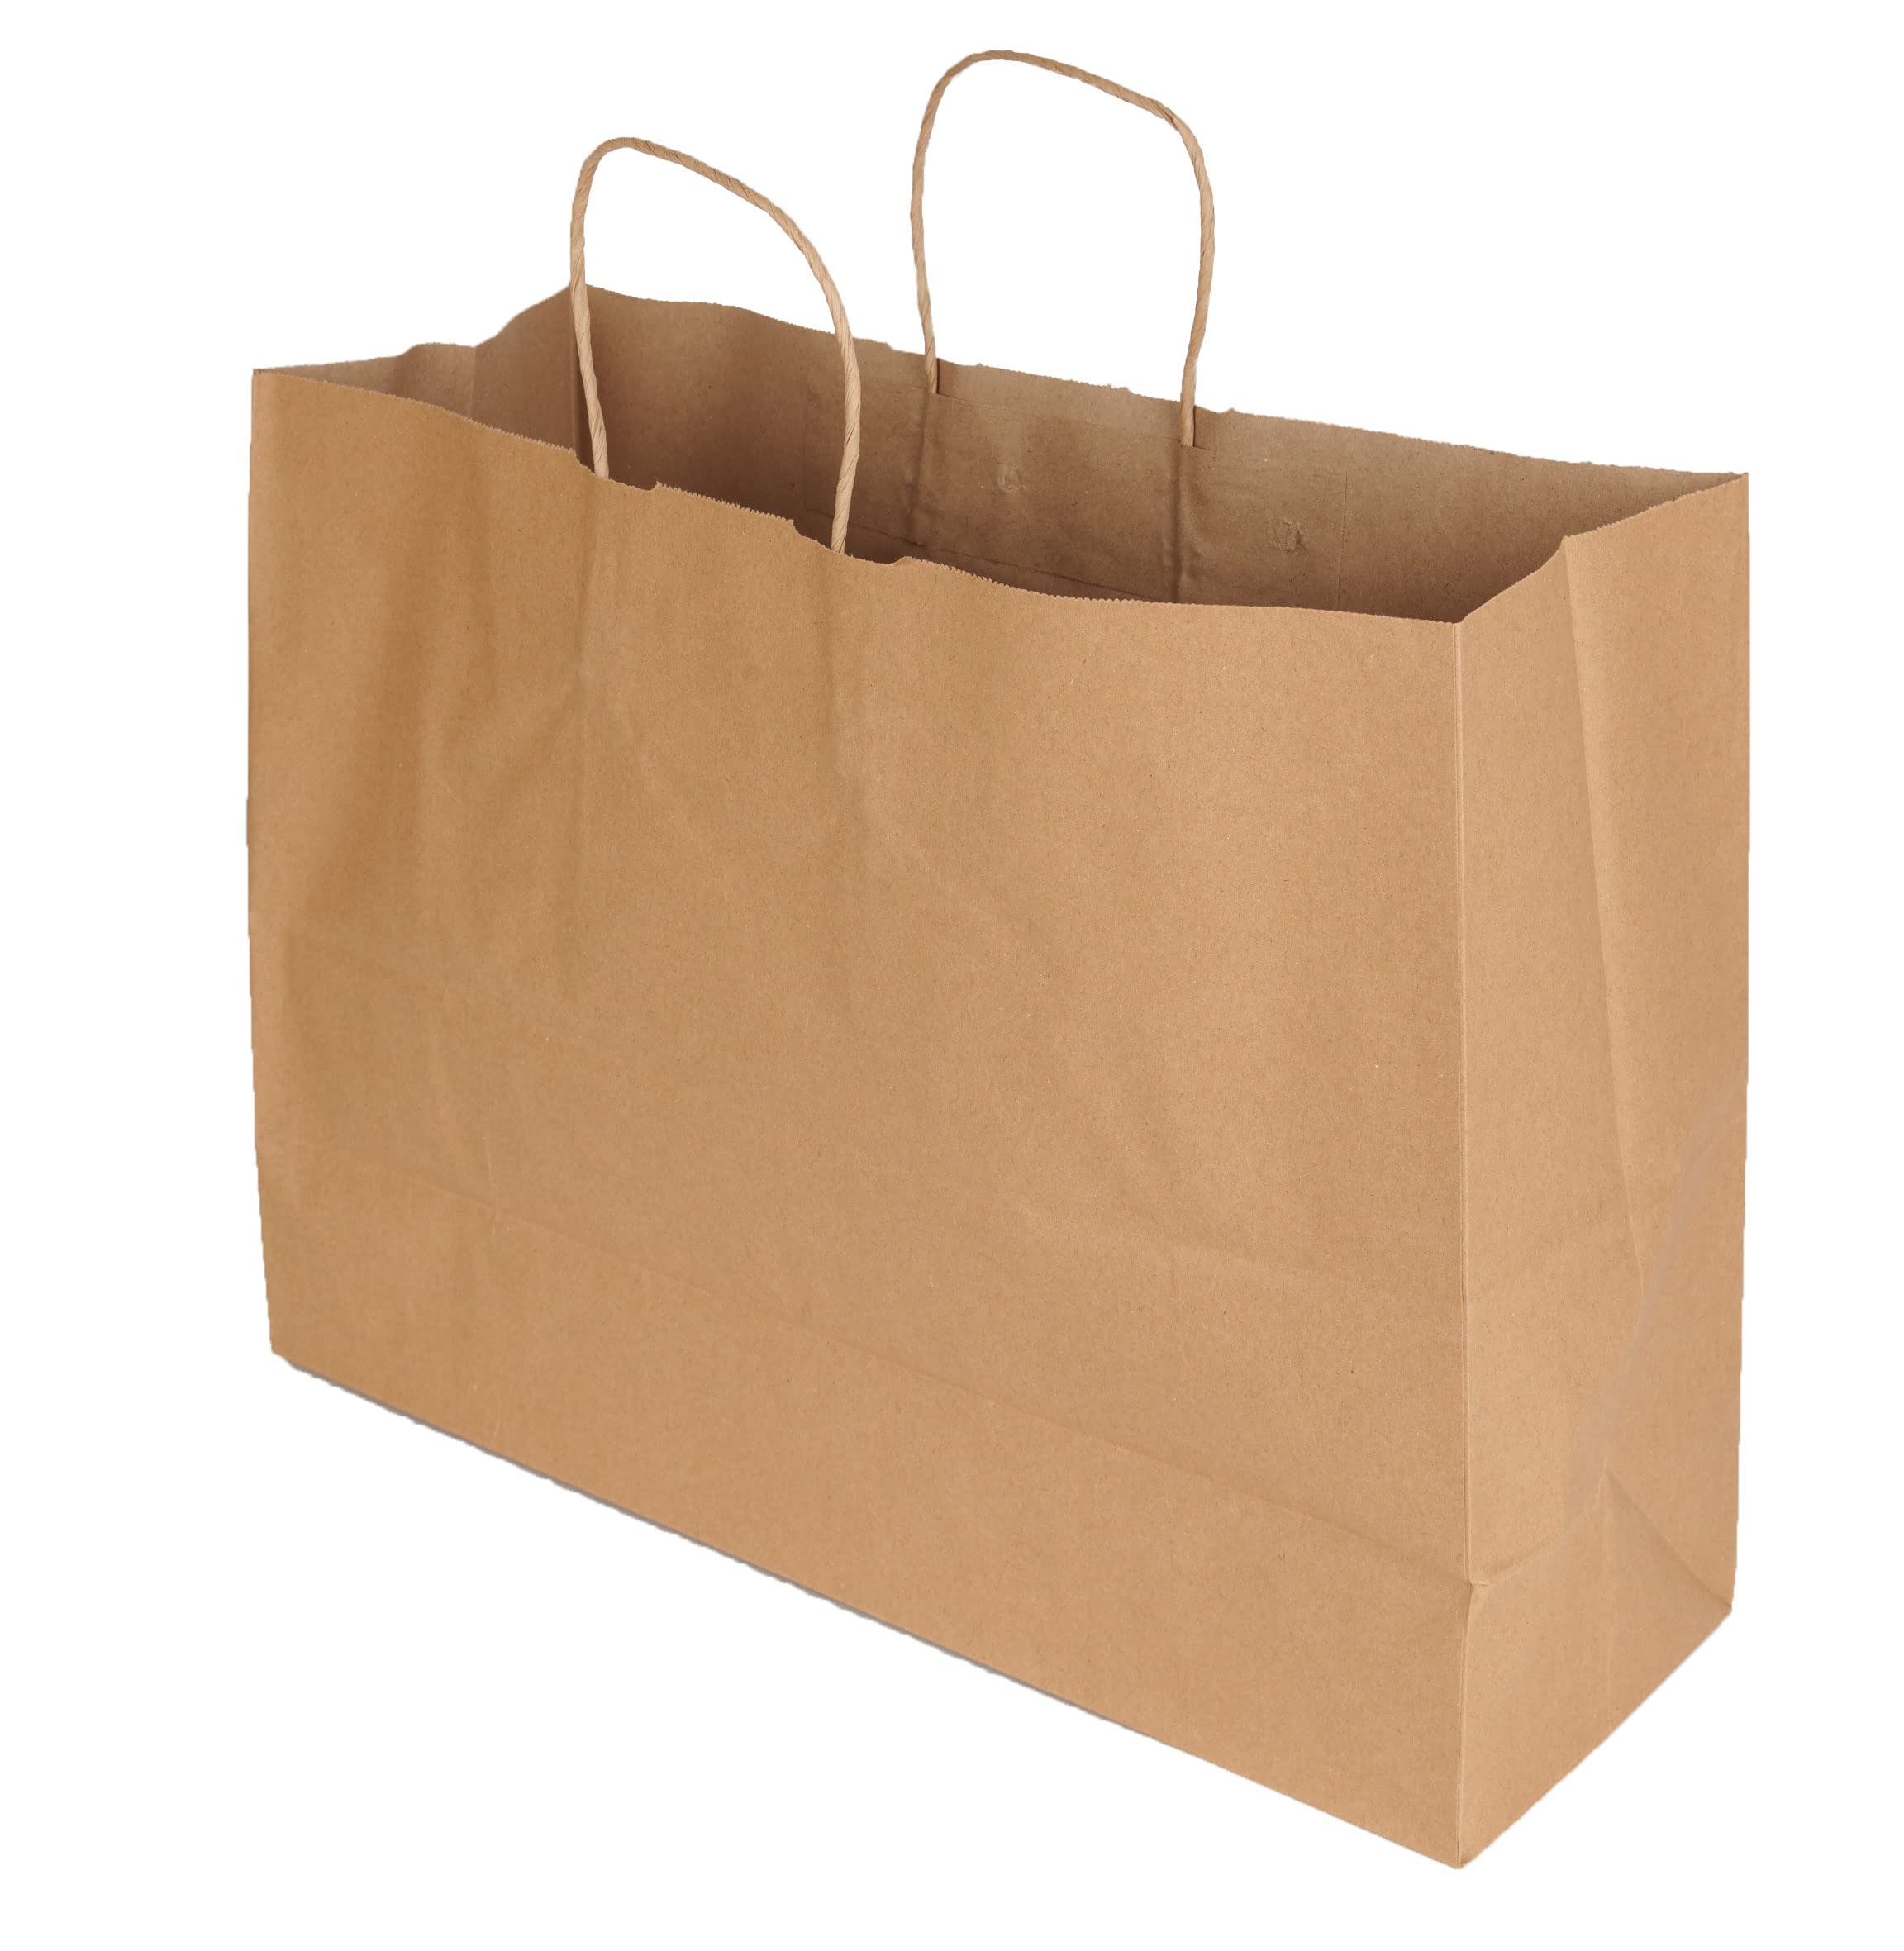 The Versatility and Sustainability of Paper Bags with Handles